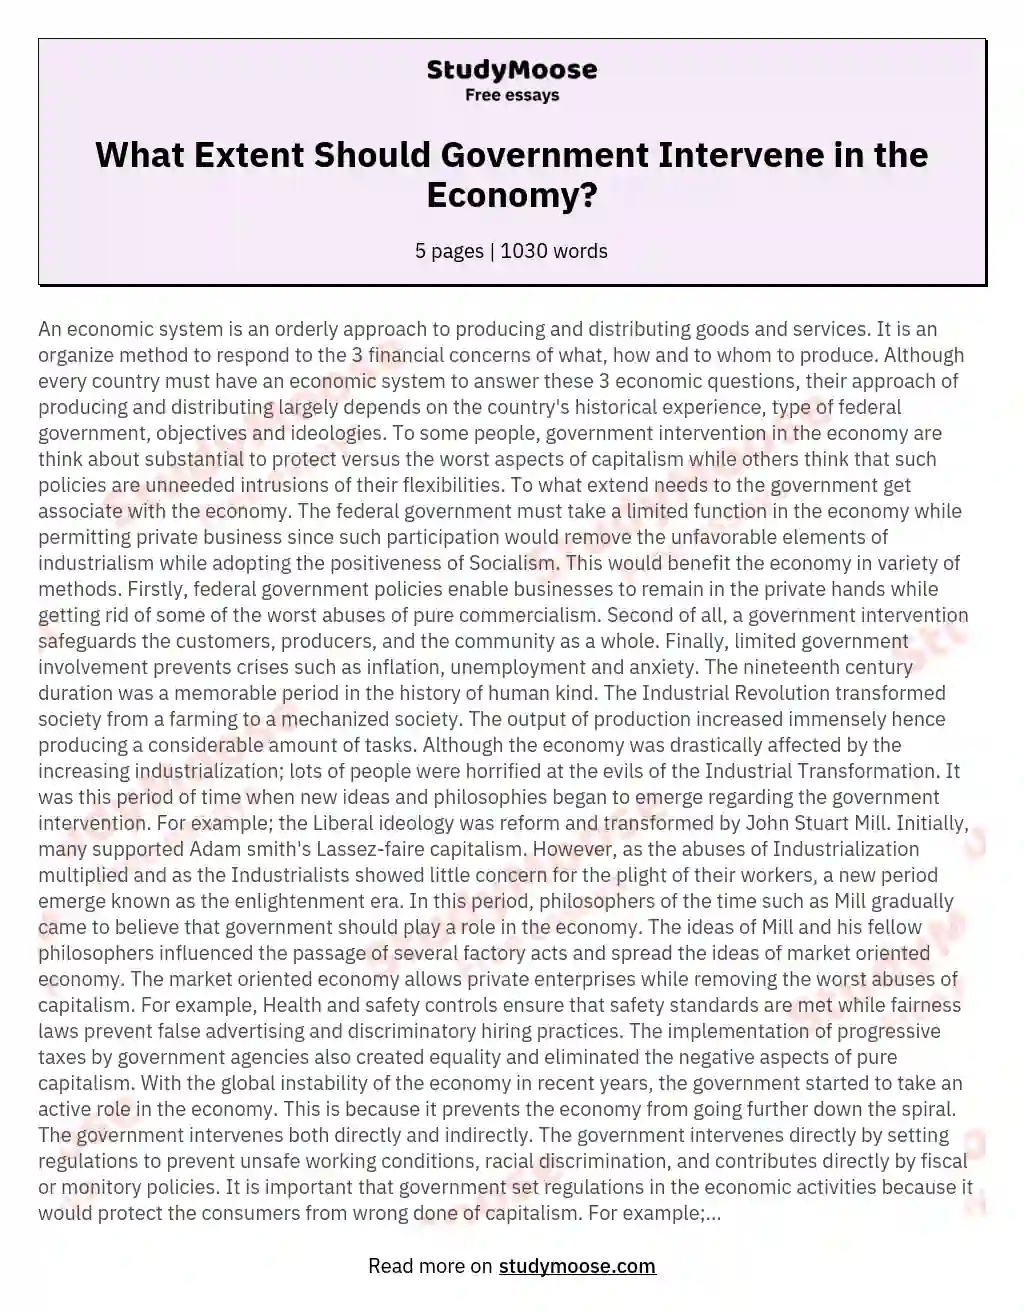 What Extent Should Government Intervene in the Economy? essay